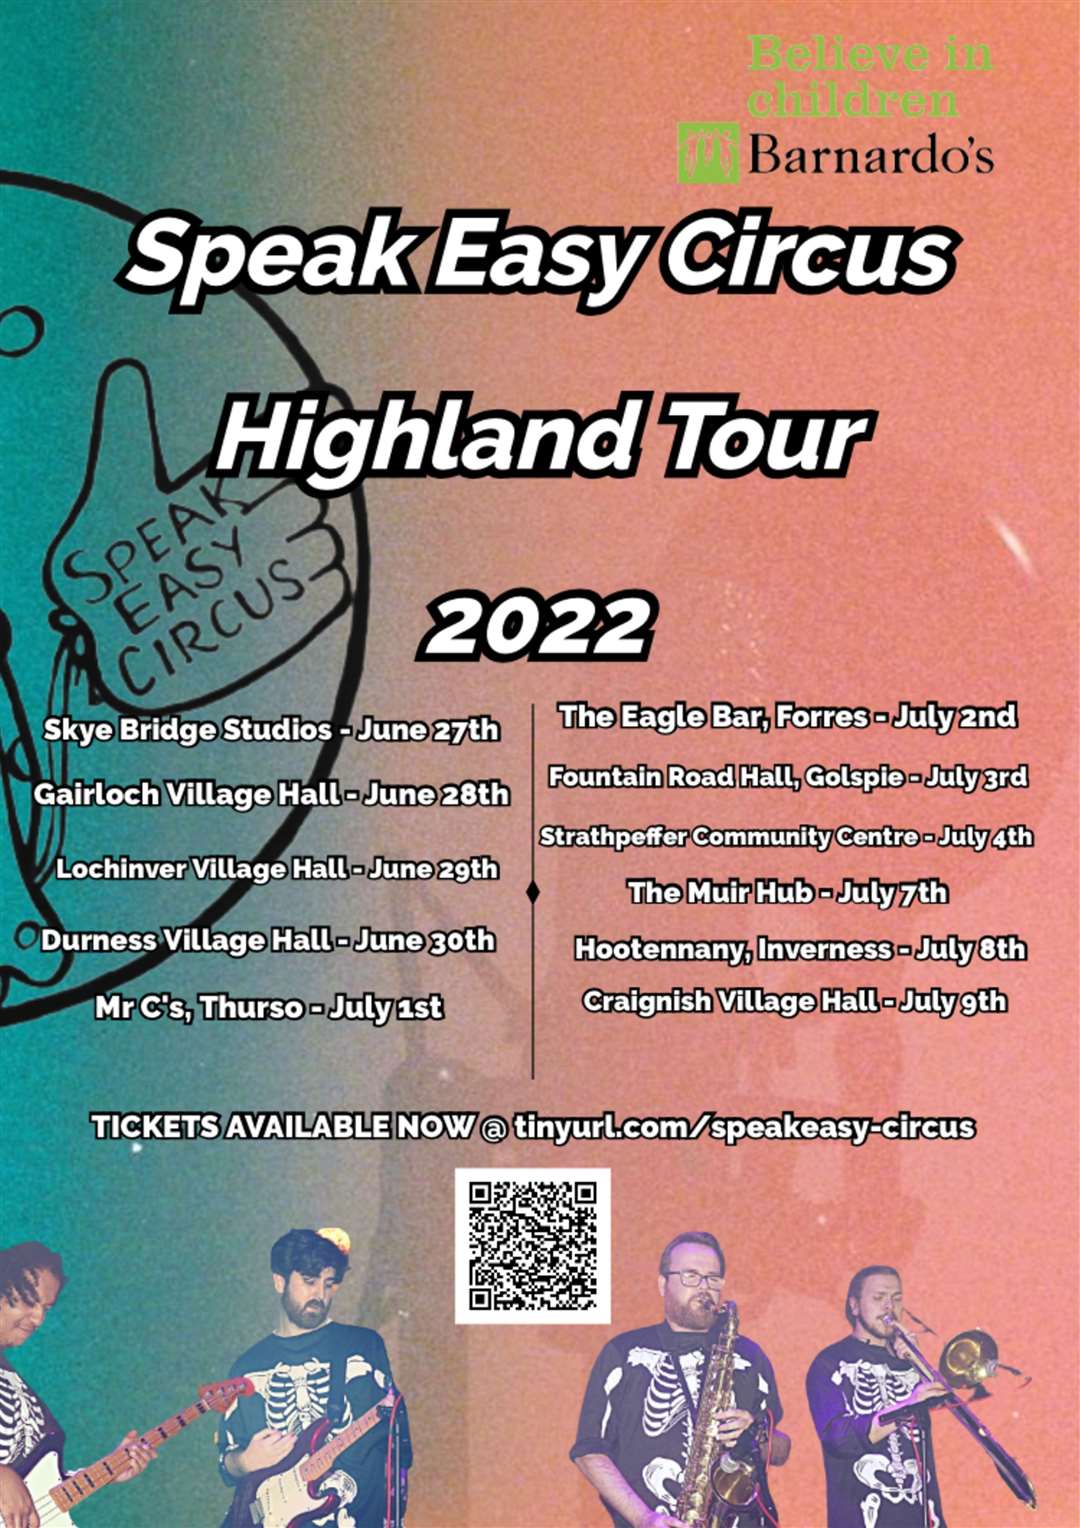 The 12-day tour has 11 gigs, three of which are in Sutherland.